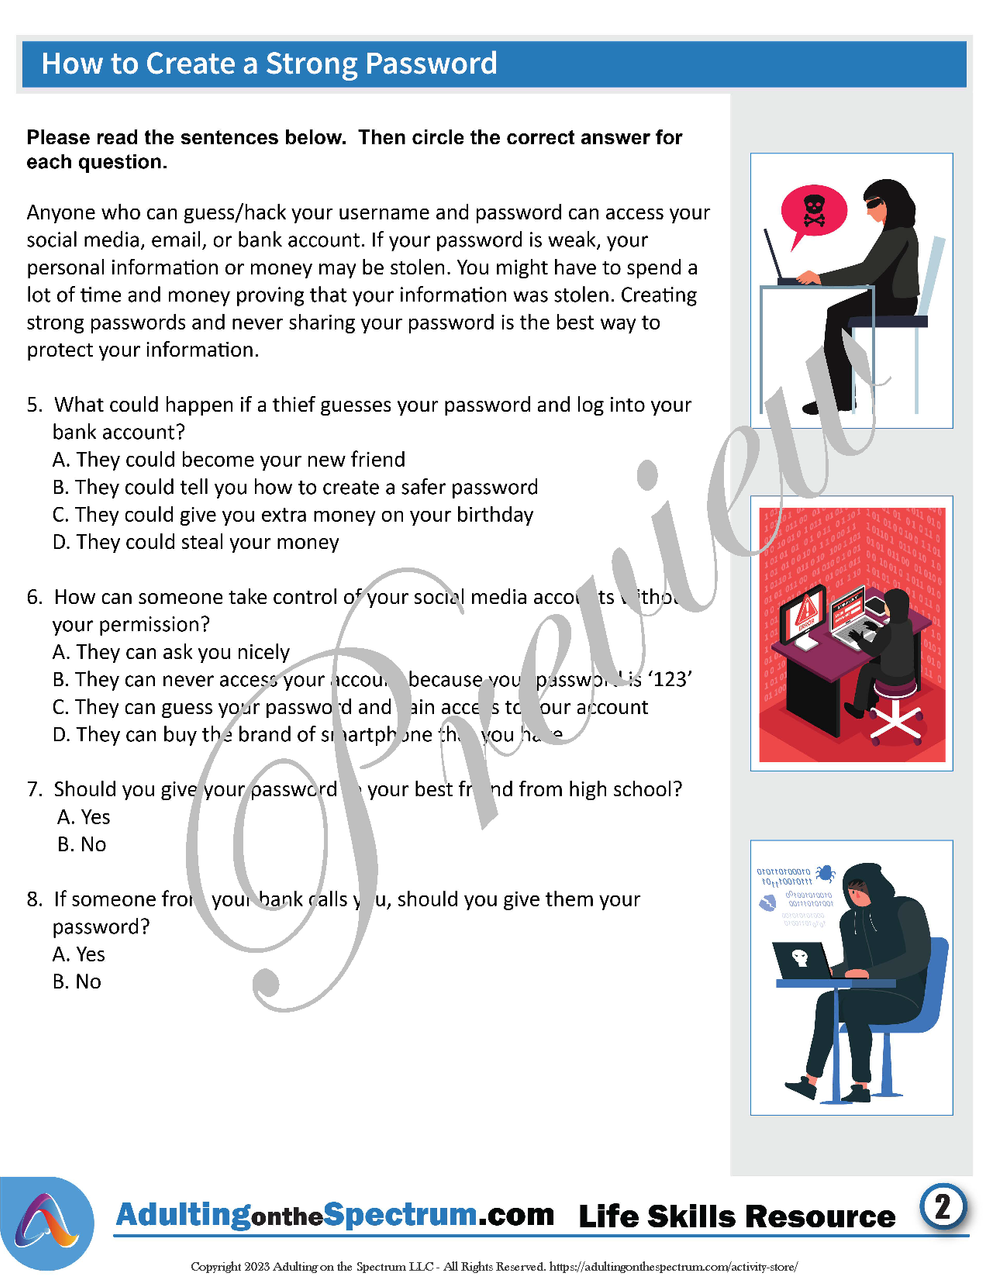 Essential Life Skills Activity for Teens and Adults - How to Create a Secure Password 